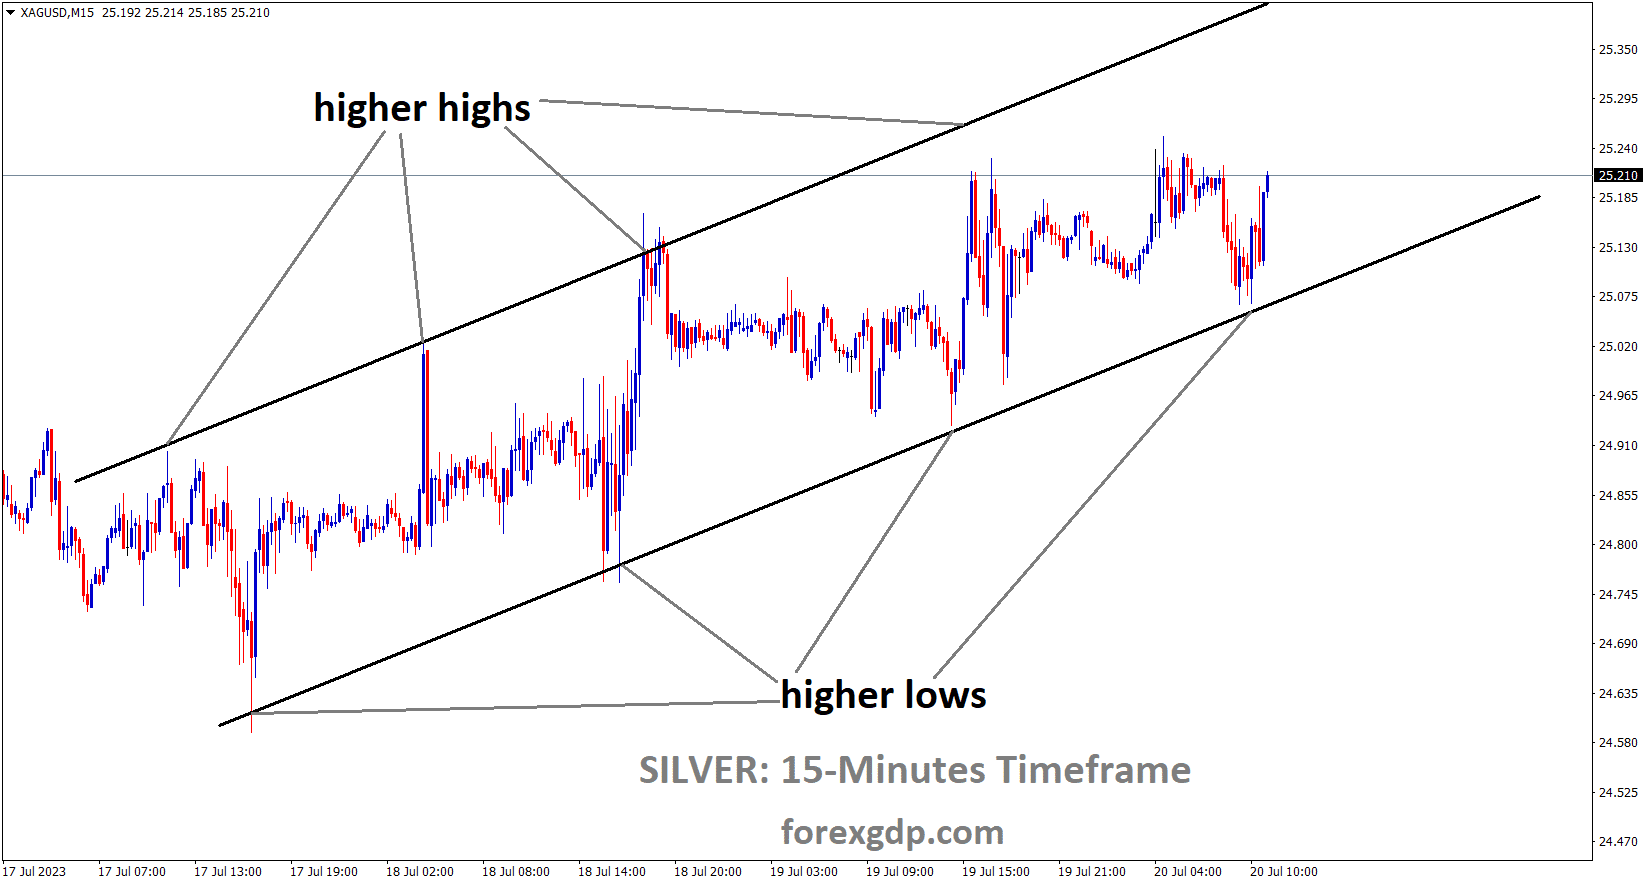 XAGUSD Silver price is moving in an Ascending channel and the market has rebounded from the higher low area of the channel 1